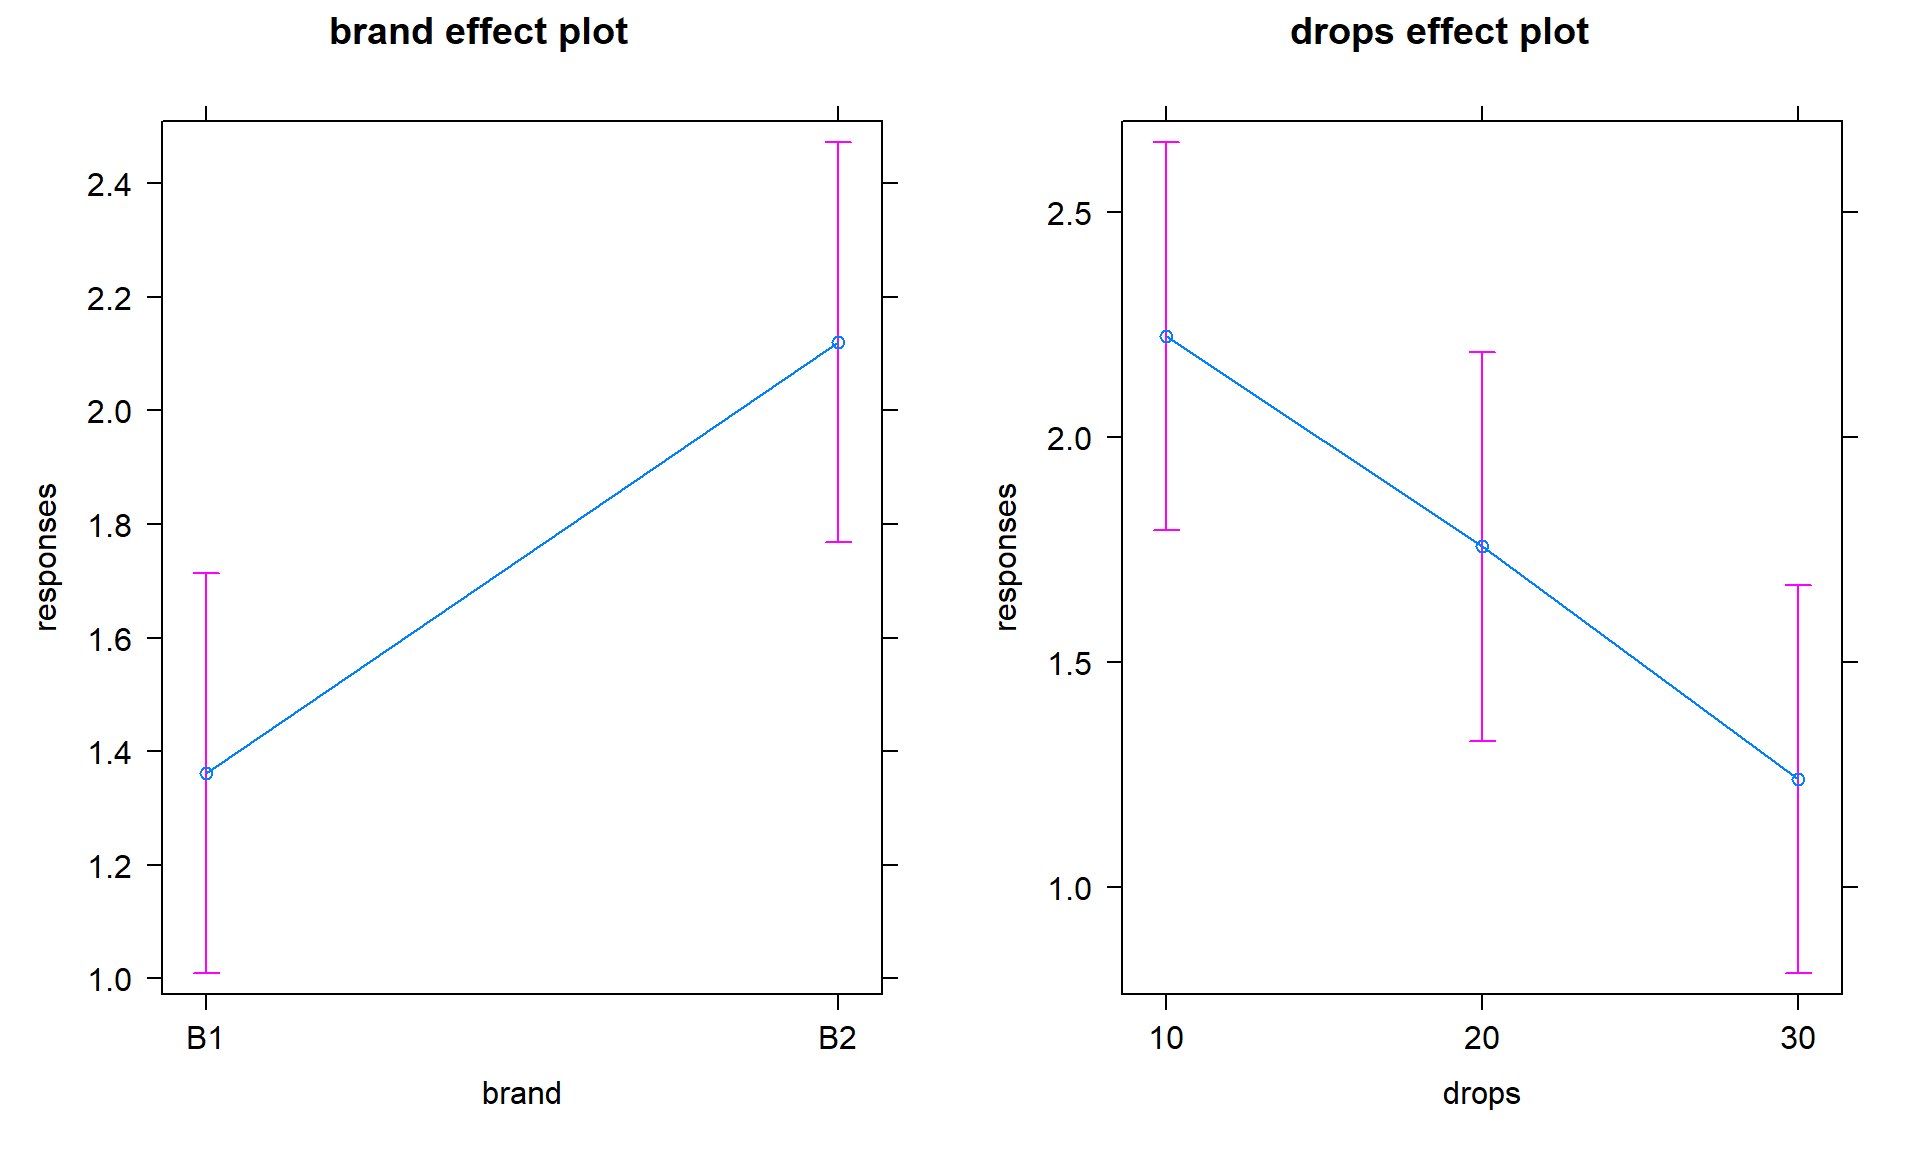 Term-plots of additive model for paper towel data. Left panel displays results for two brands and right panel for number of drops of water, each after controlling for the other.